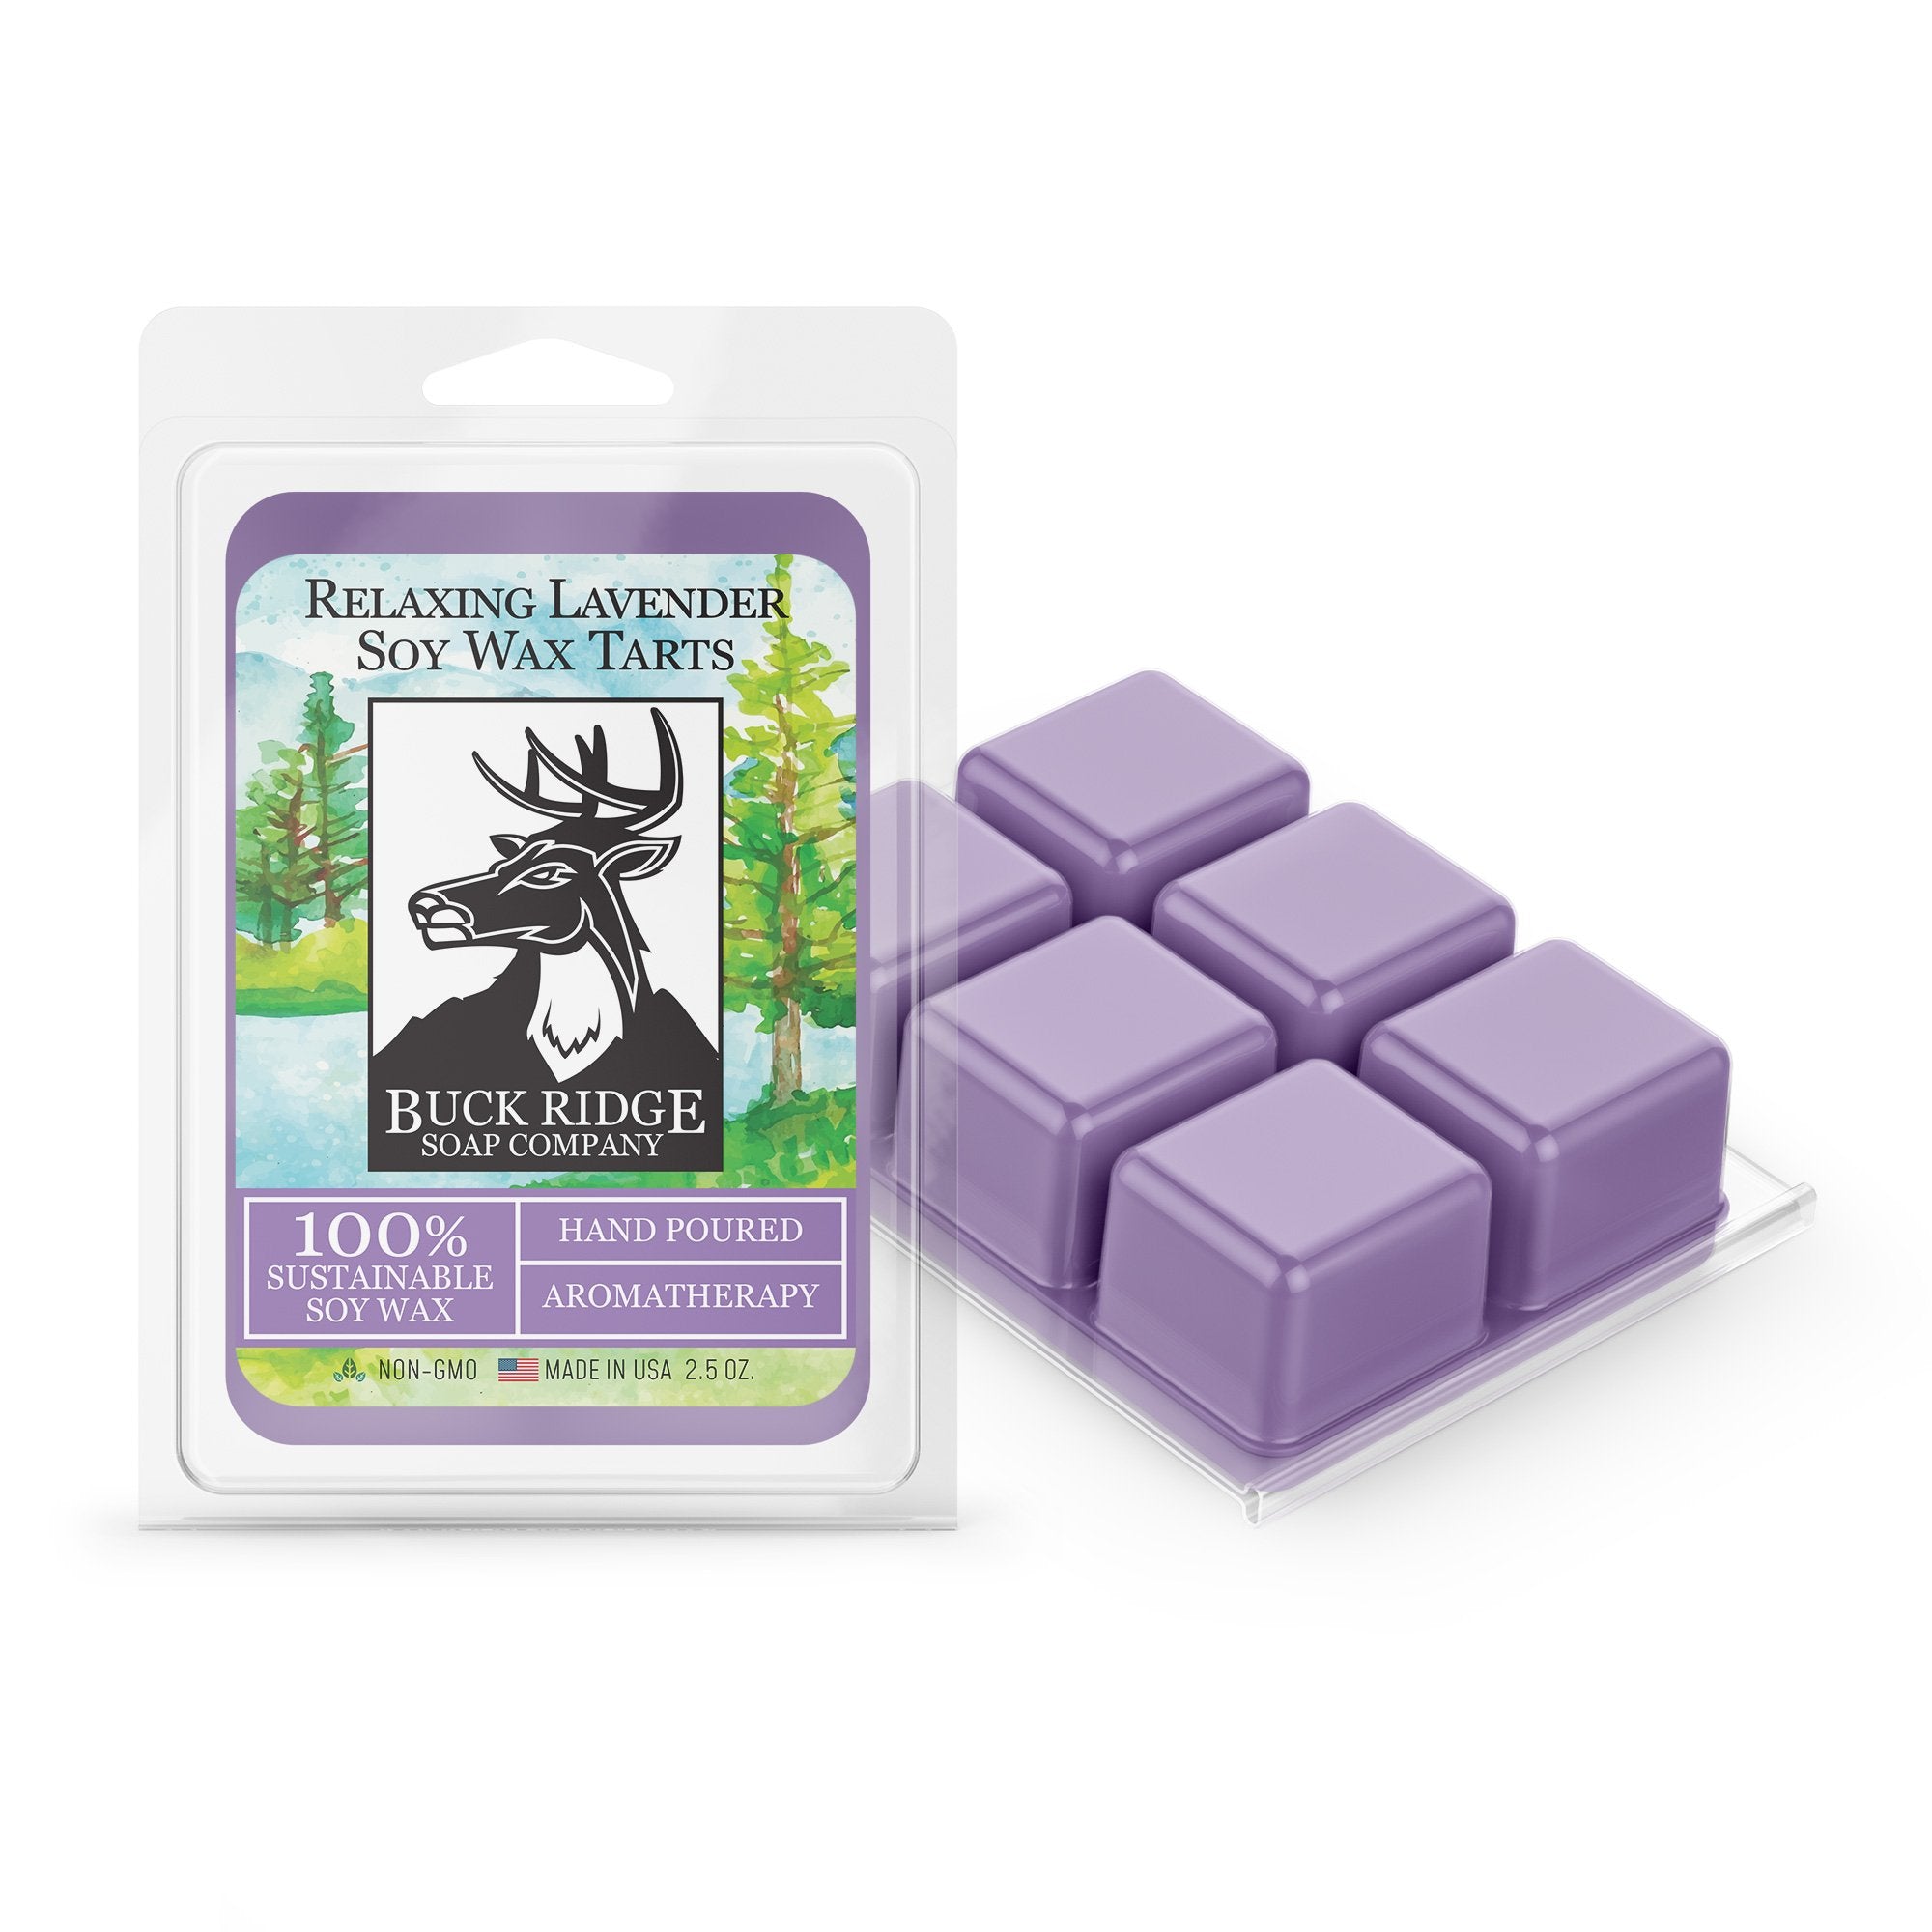 Relaxing Lavender Scented Wax Melts by Buck Ridge Soap Company